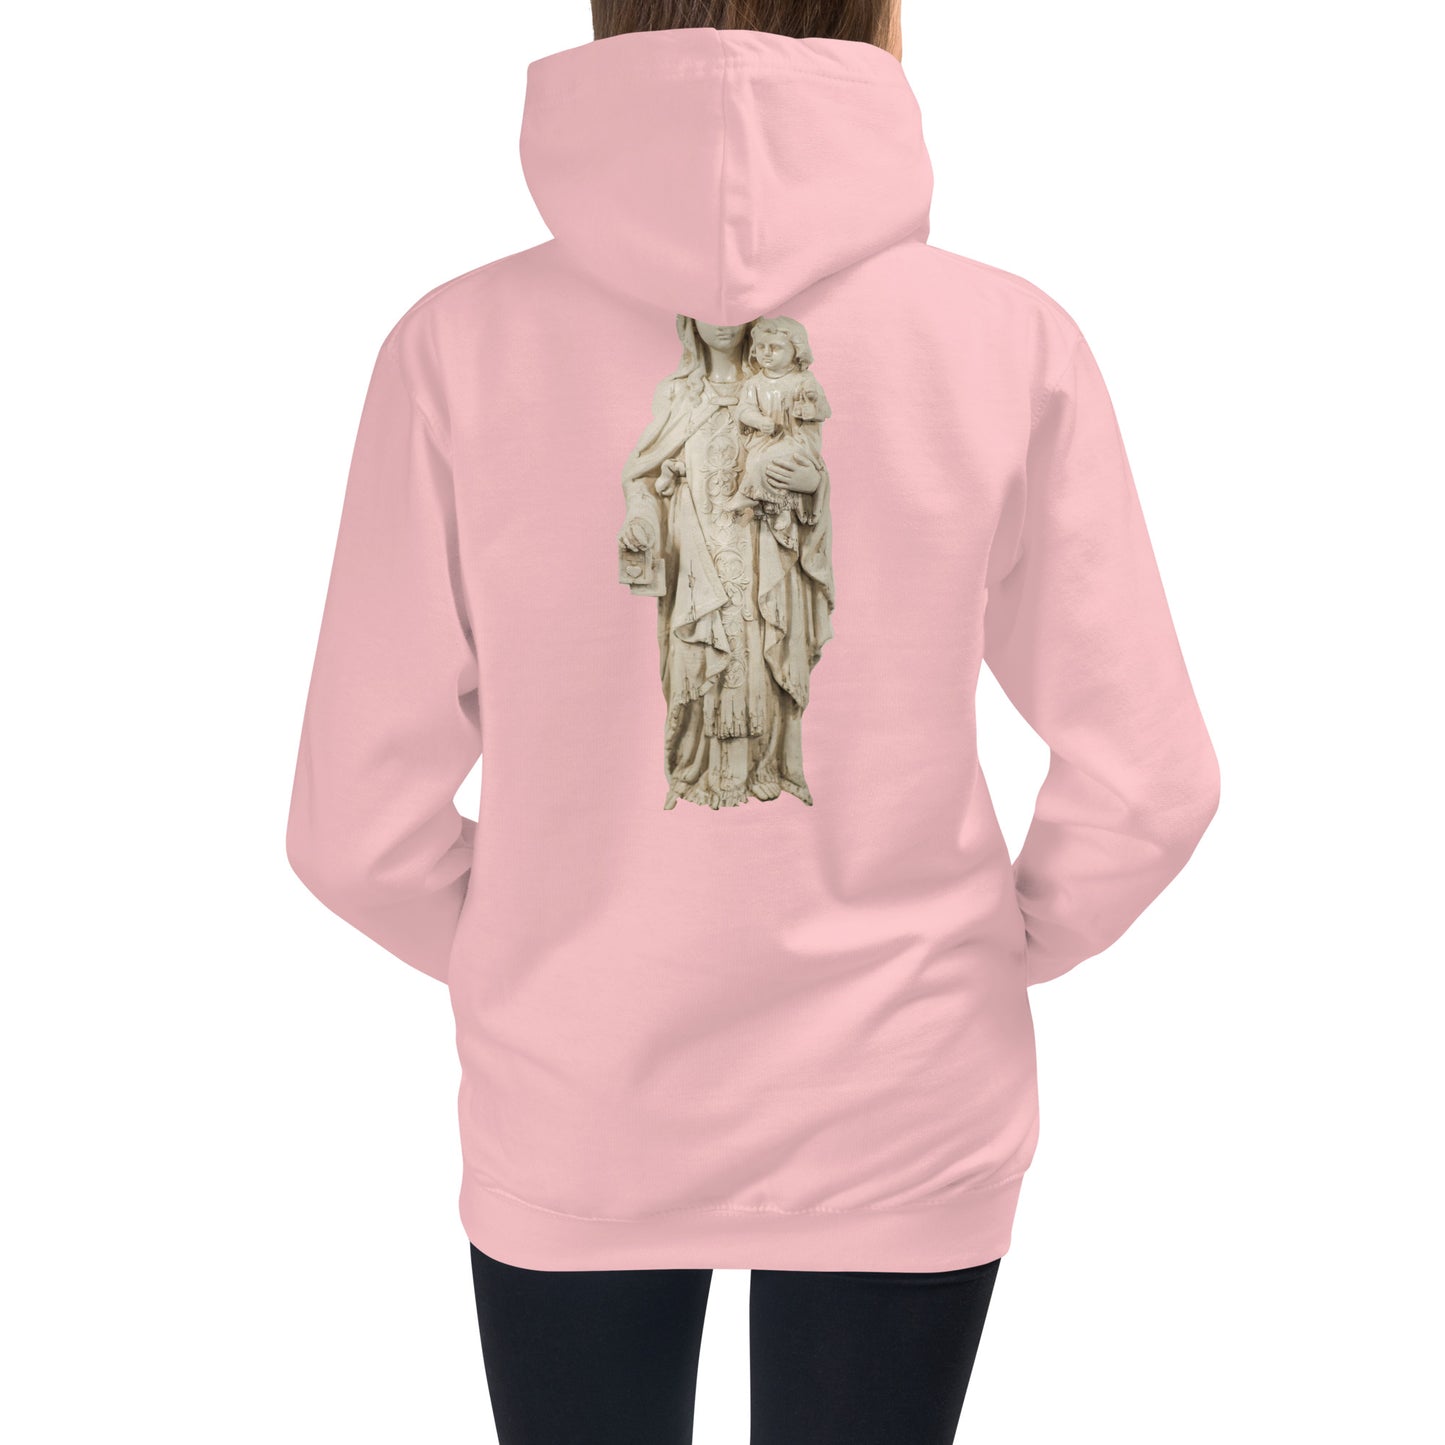 Our Lady of Mount Carmel Children's Hoodie